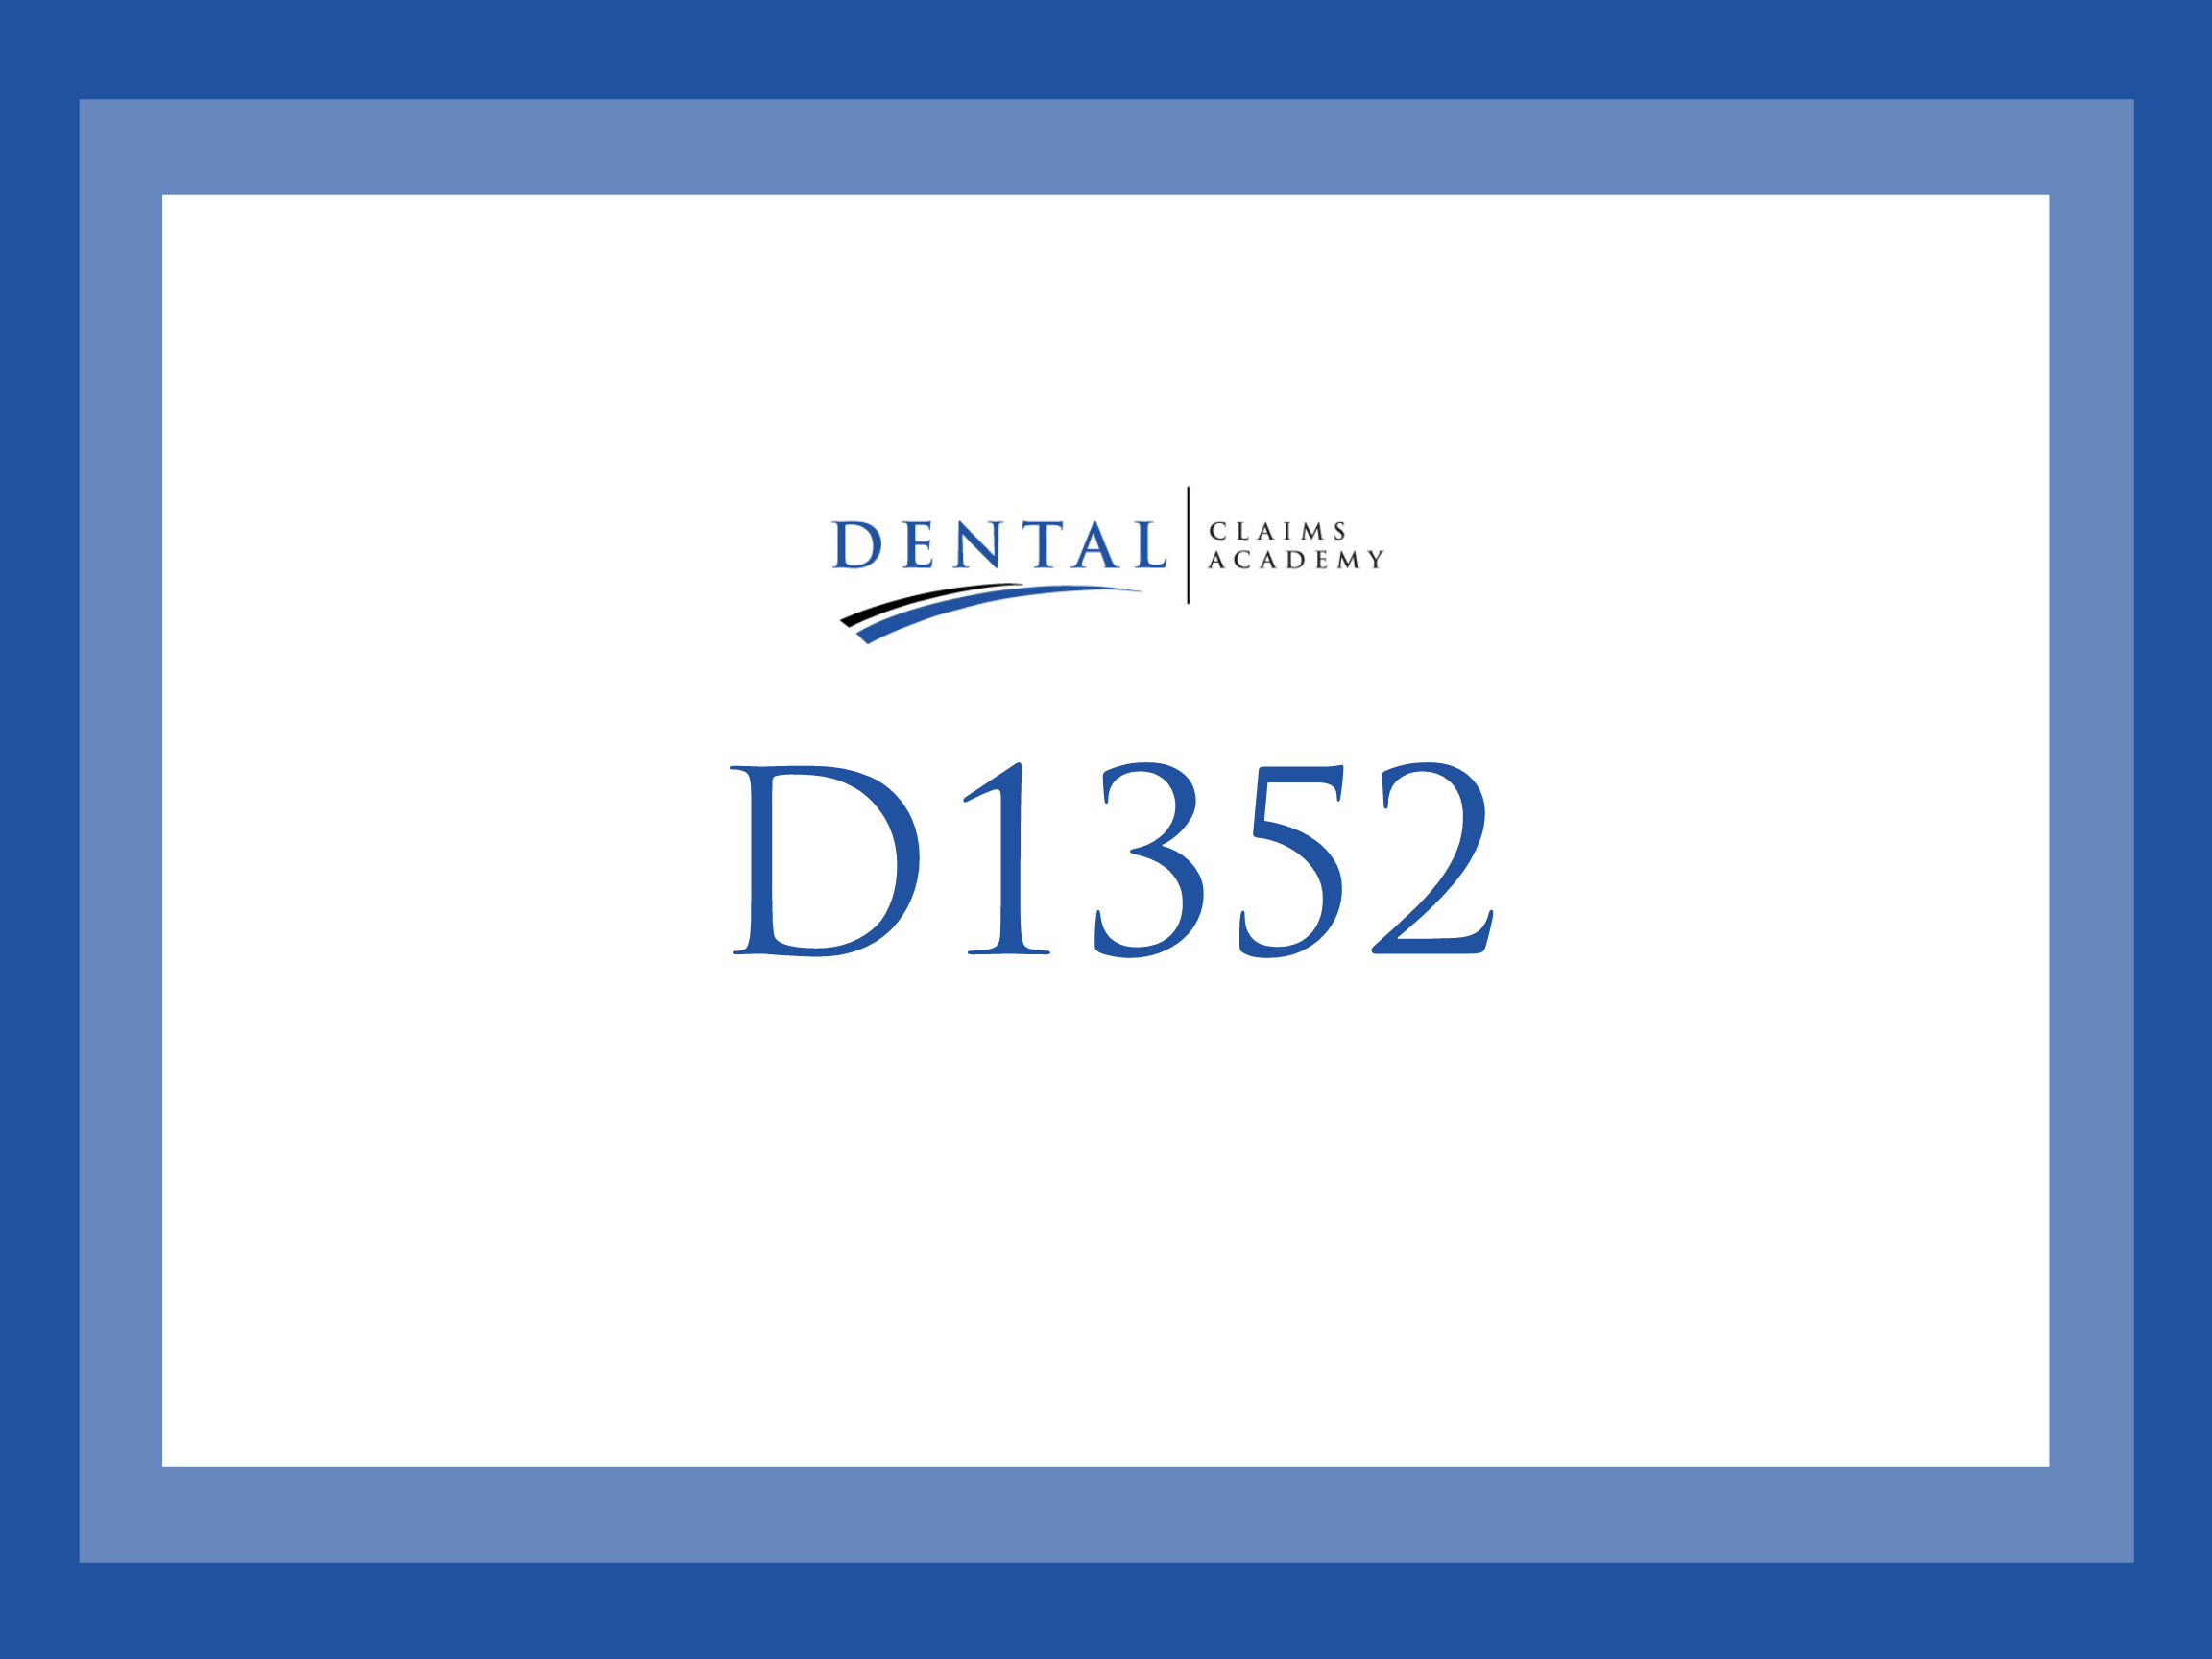 Examining CDT Code D1352: What is the difference between a Sealant vs Preventive Resin Restoration vs Filling?